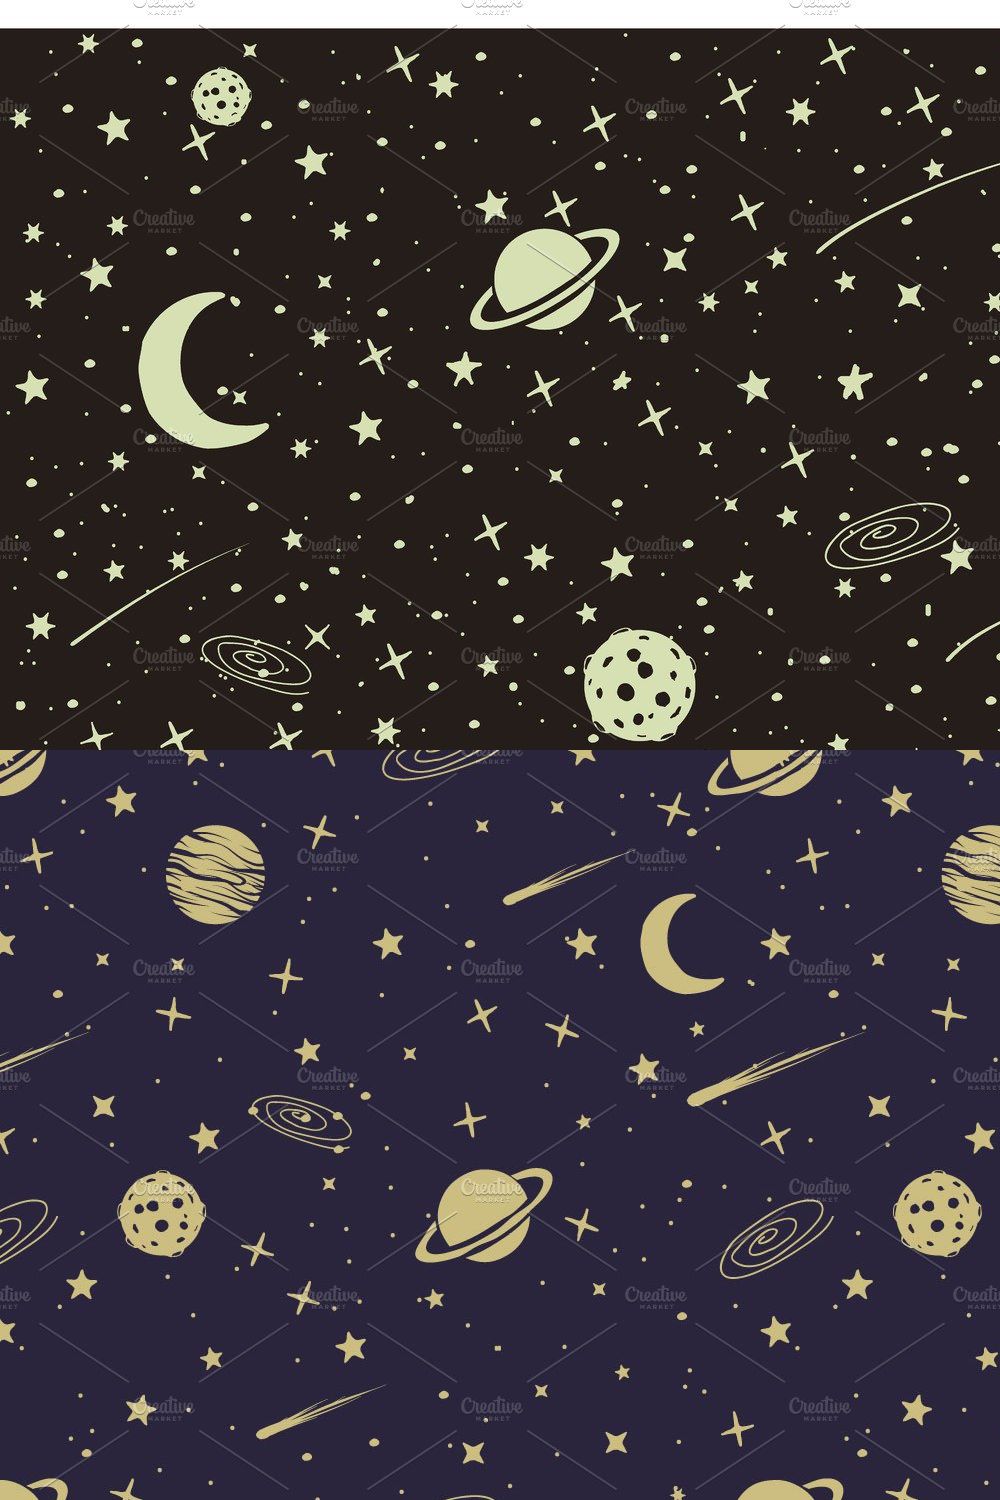 Vintage space background pinterest preview image.